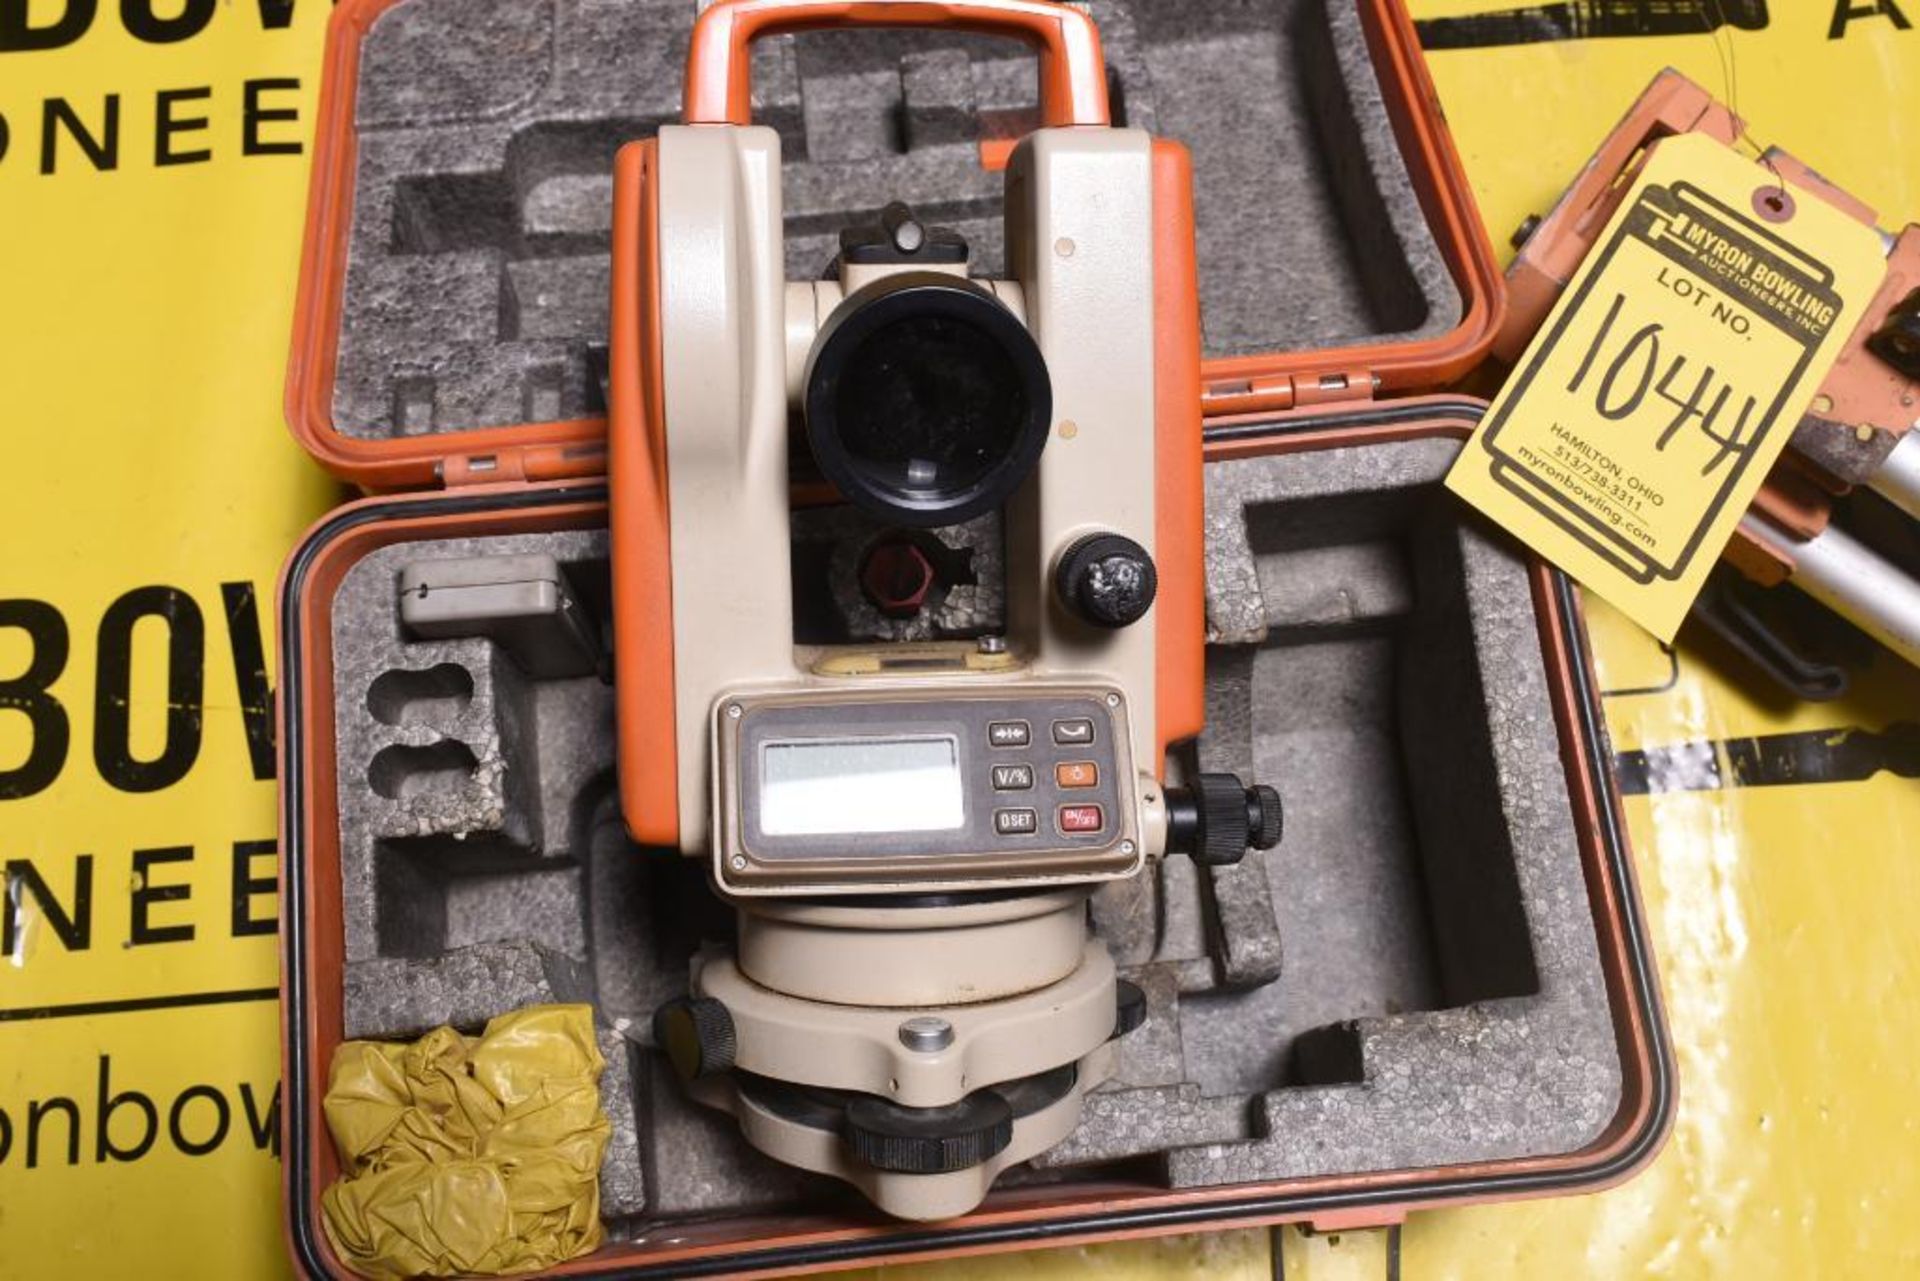 LEICA TYPE T100 TOTAL STATION BUILDER LEVEL, W/ TRIPOD - Image 2 of 3